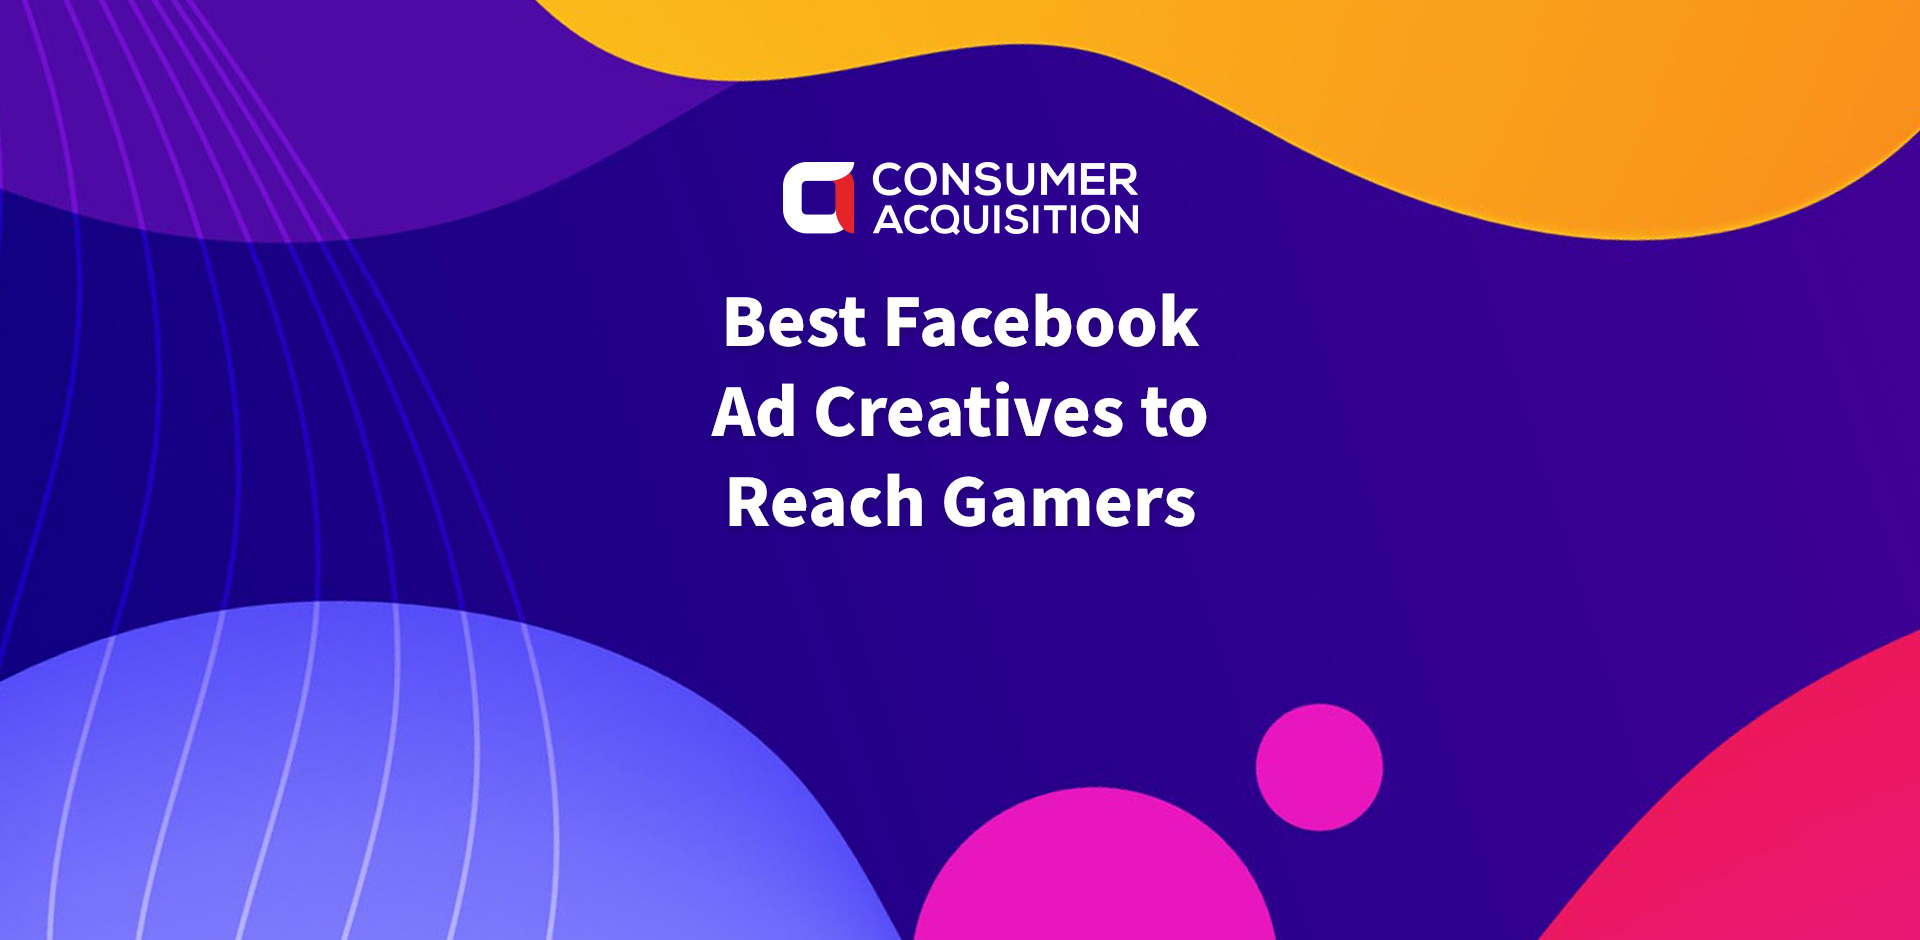 Best Facebook Ad Creatives to Reach Gamers